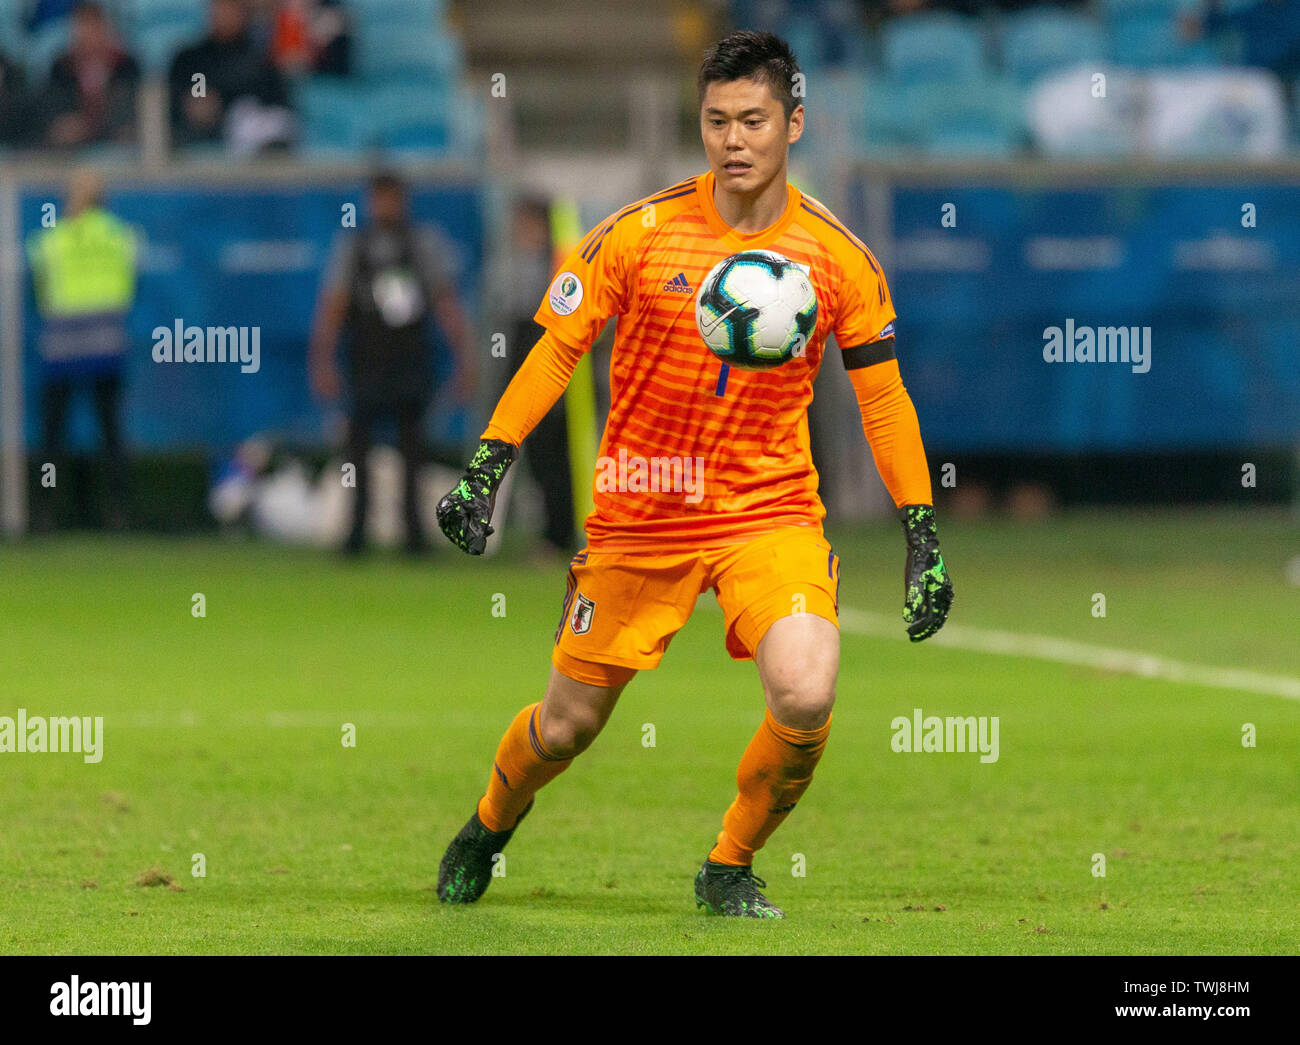 Porto Alegre, Brazil. 20th June, 2019. Eiji Kawashima is bidding during a match between Uruguay and Japan, valid for the 2019 Copa America group stage, held this Thursday (20) at the Grêmio Arena in Porto Alegre, RS. Credit: Raul Pereira/FotoArena/Alamy Live News Stock Photo